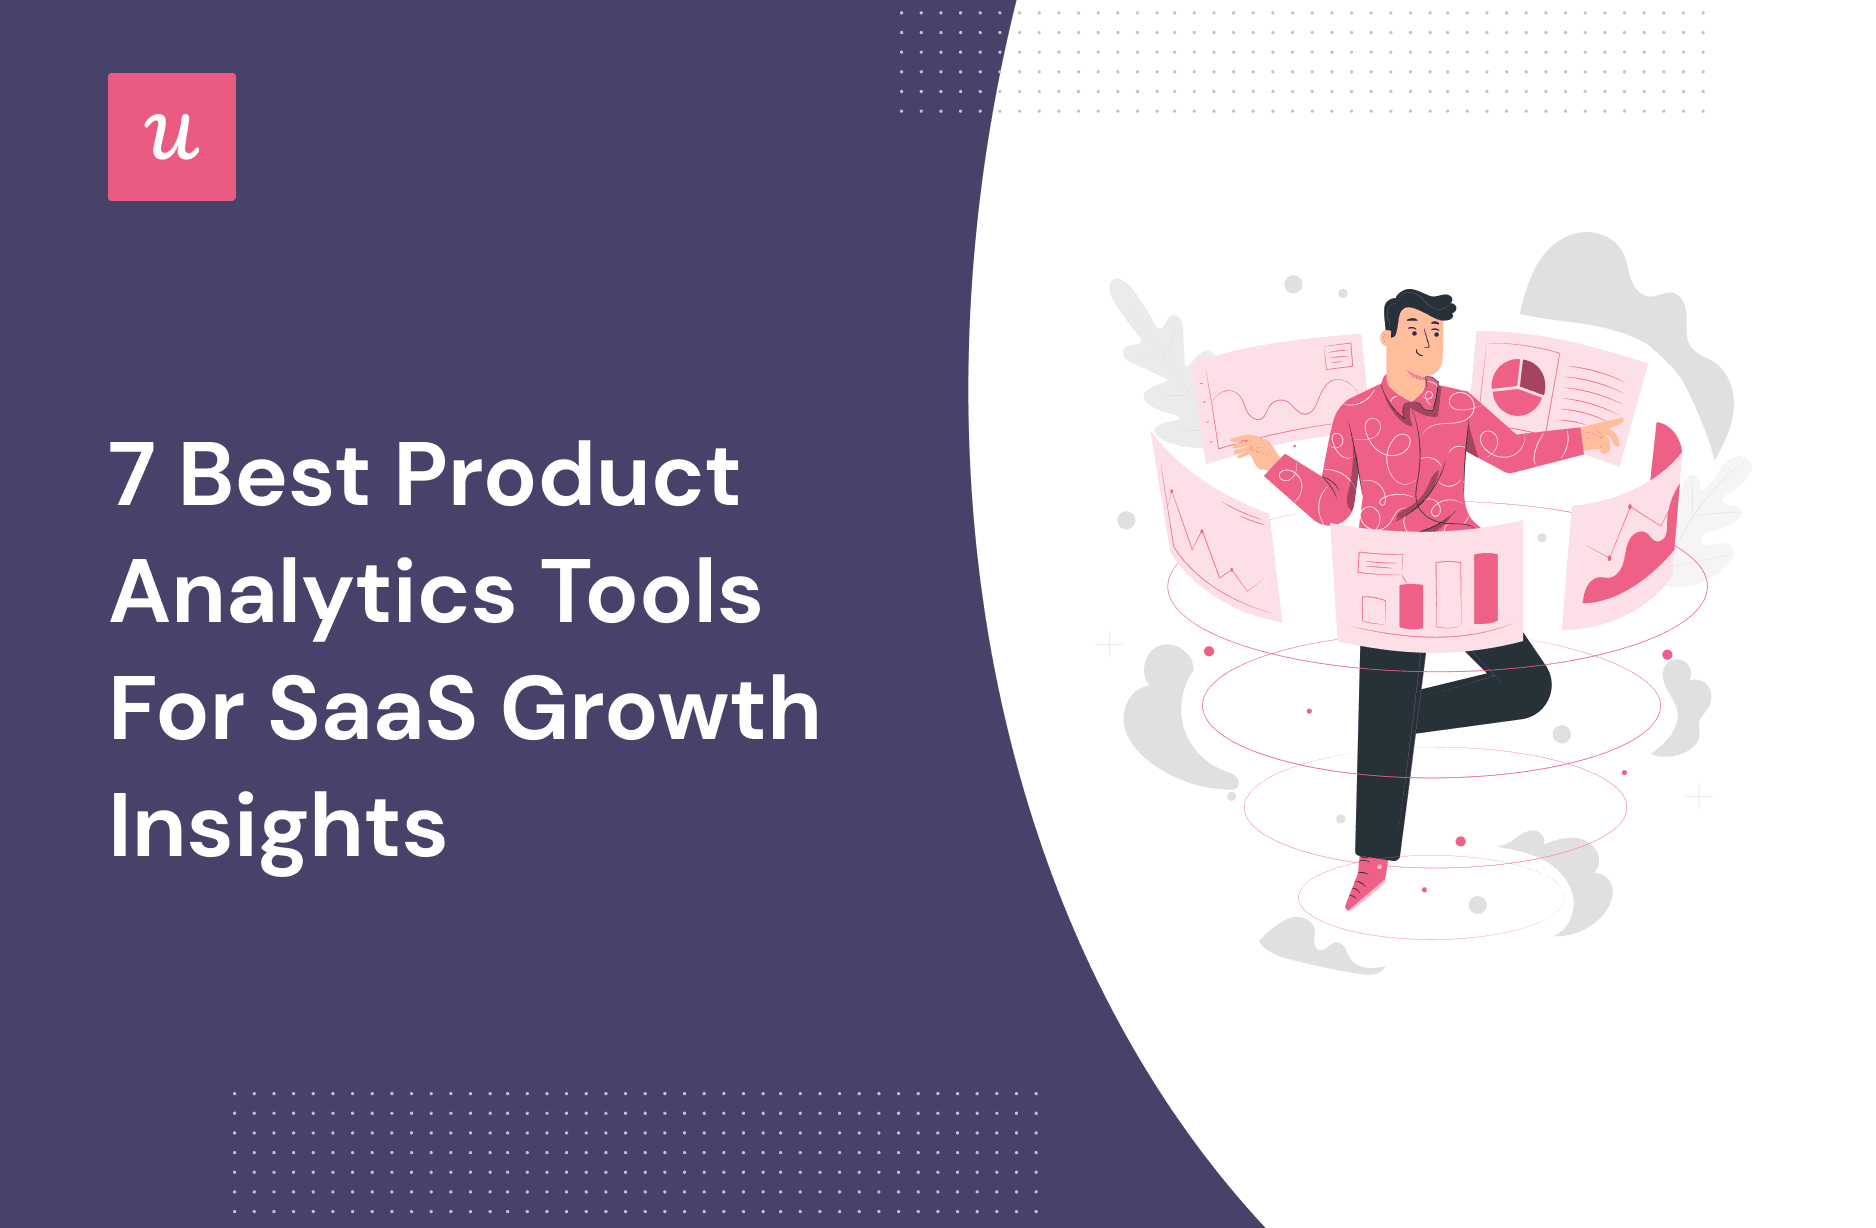 7 Best Product Analytics Tools for SaaS Growth Insights cover